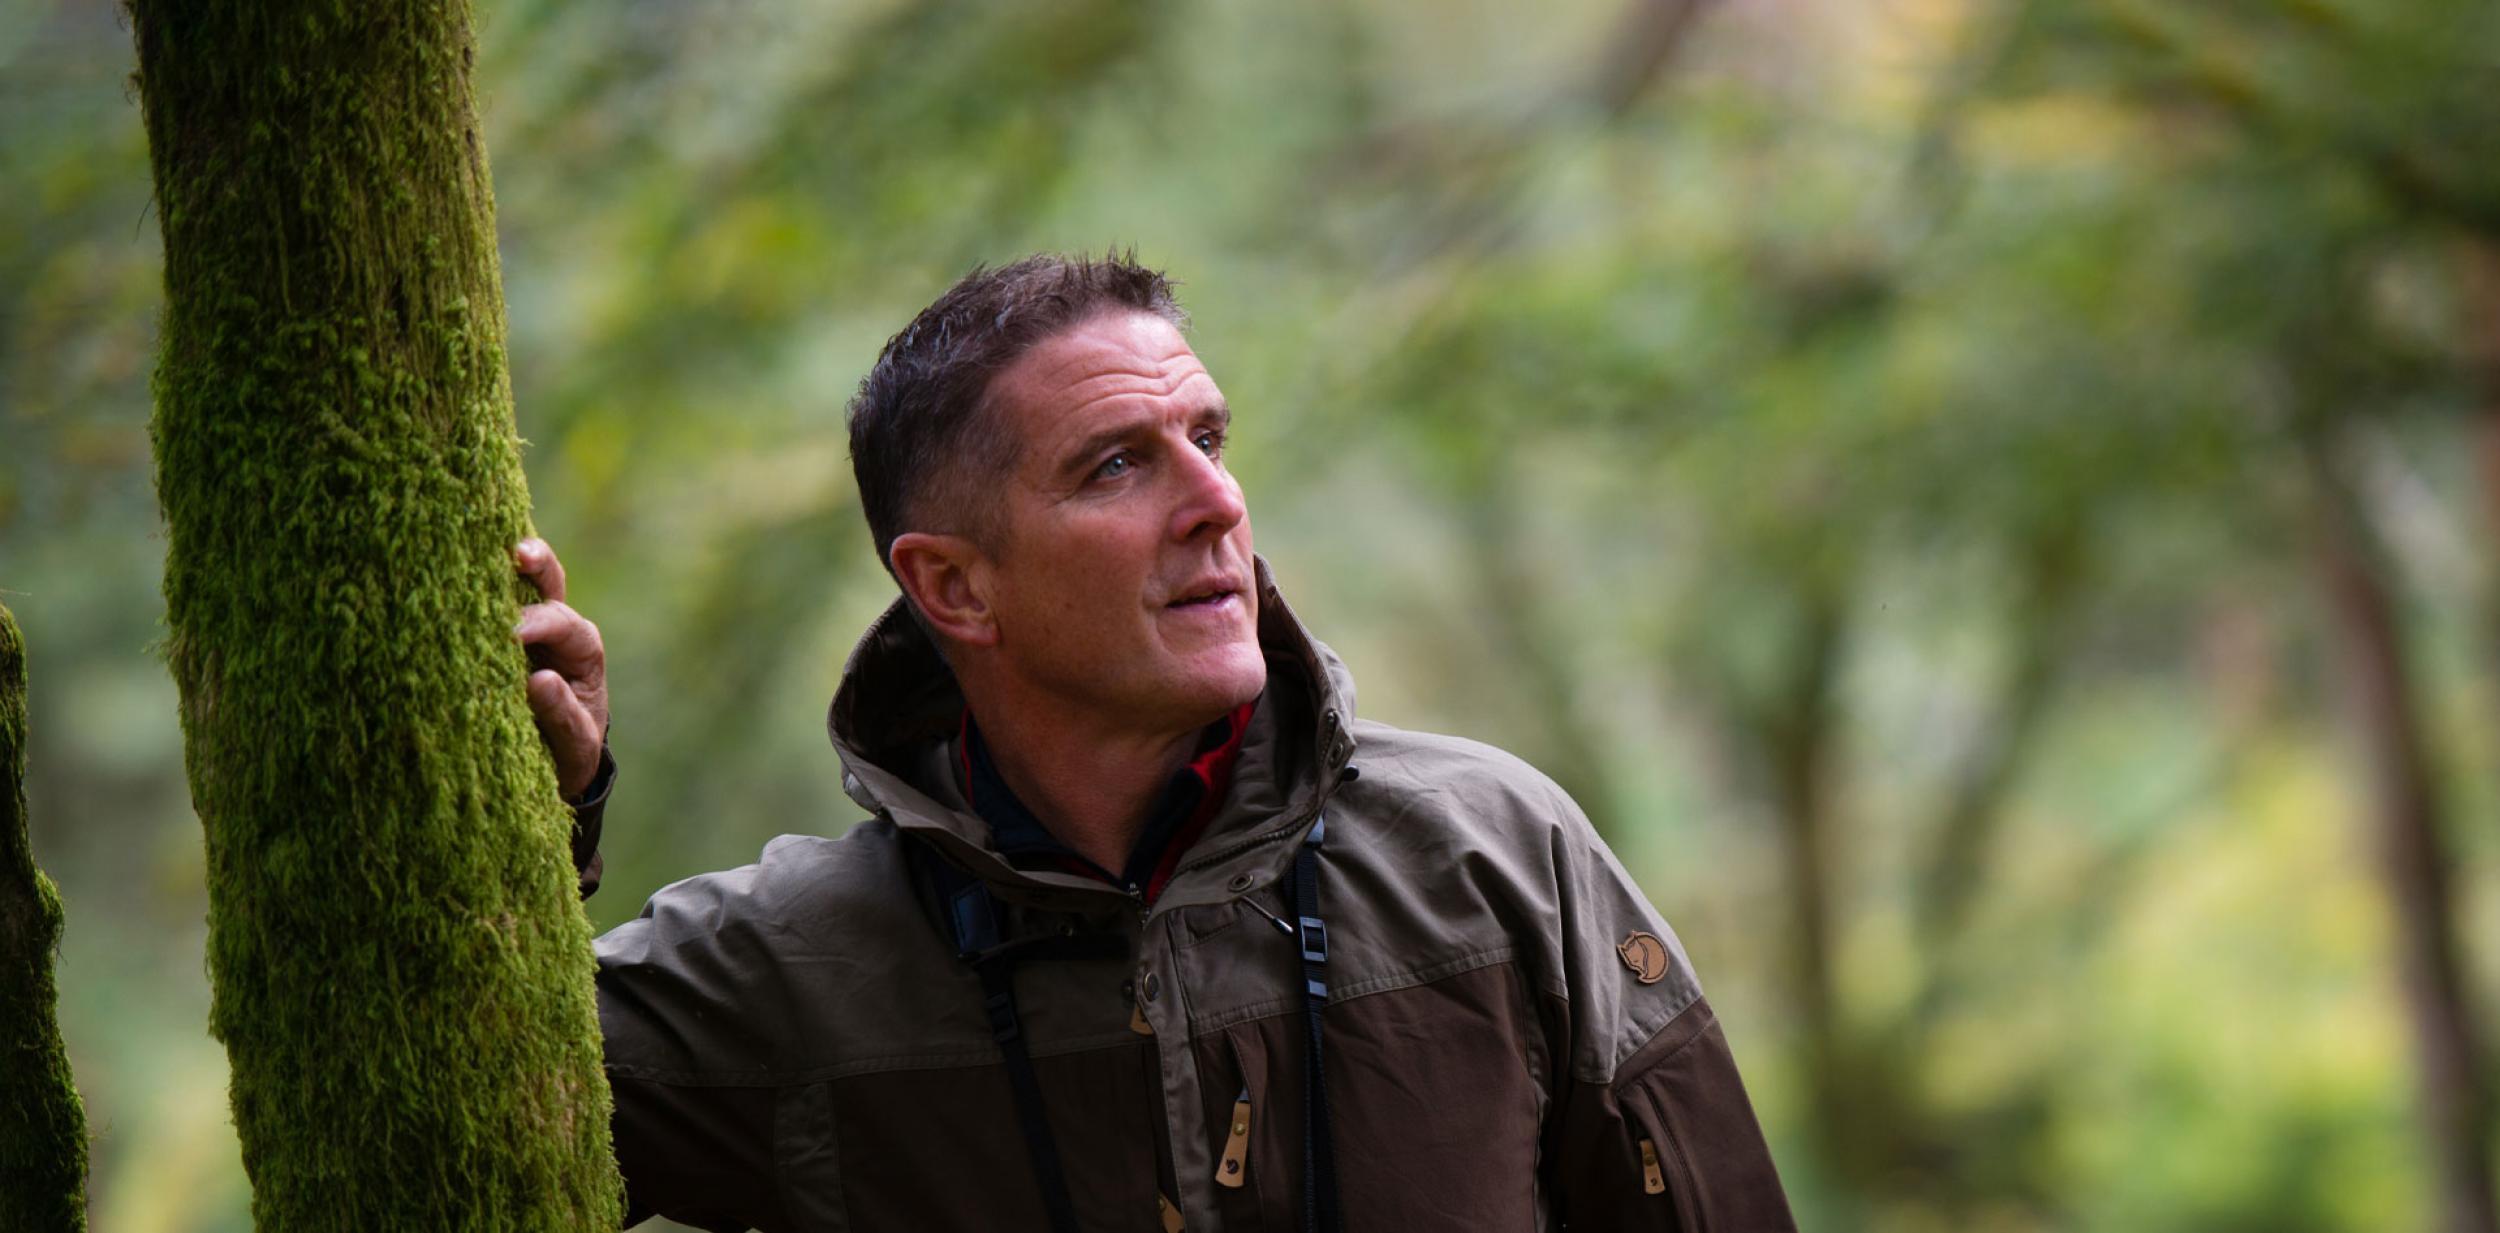 Iolo Williams leaning against a tree in a forrest.